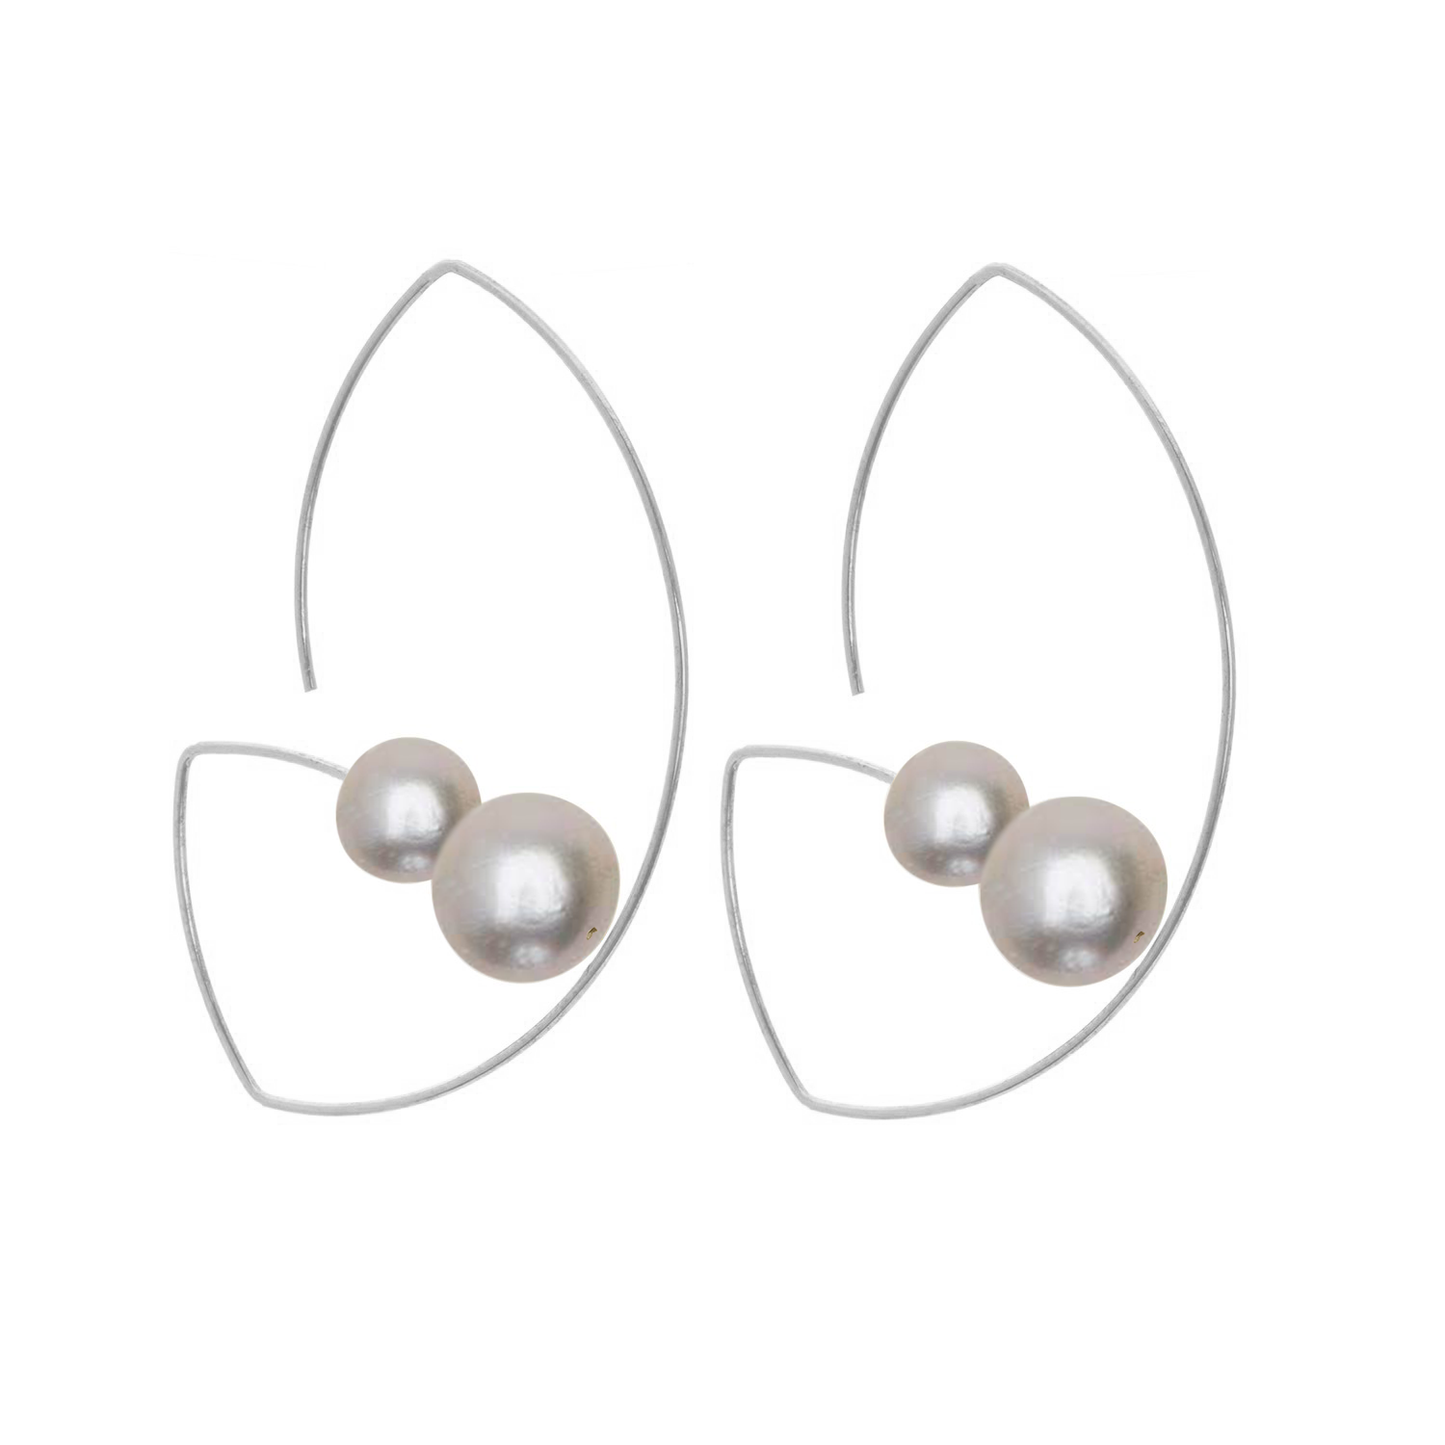 Long Angled Curve Earrings with Round Freshwater Pearls